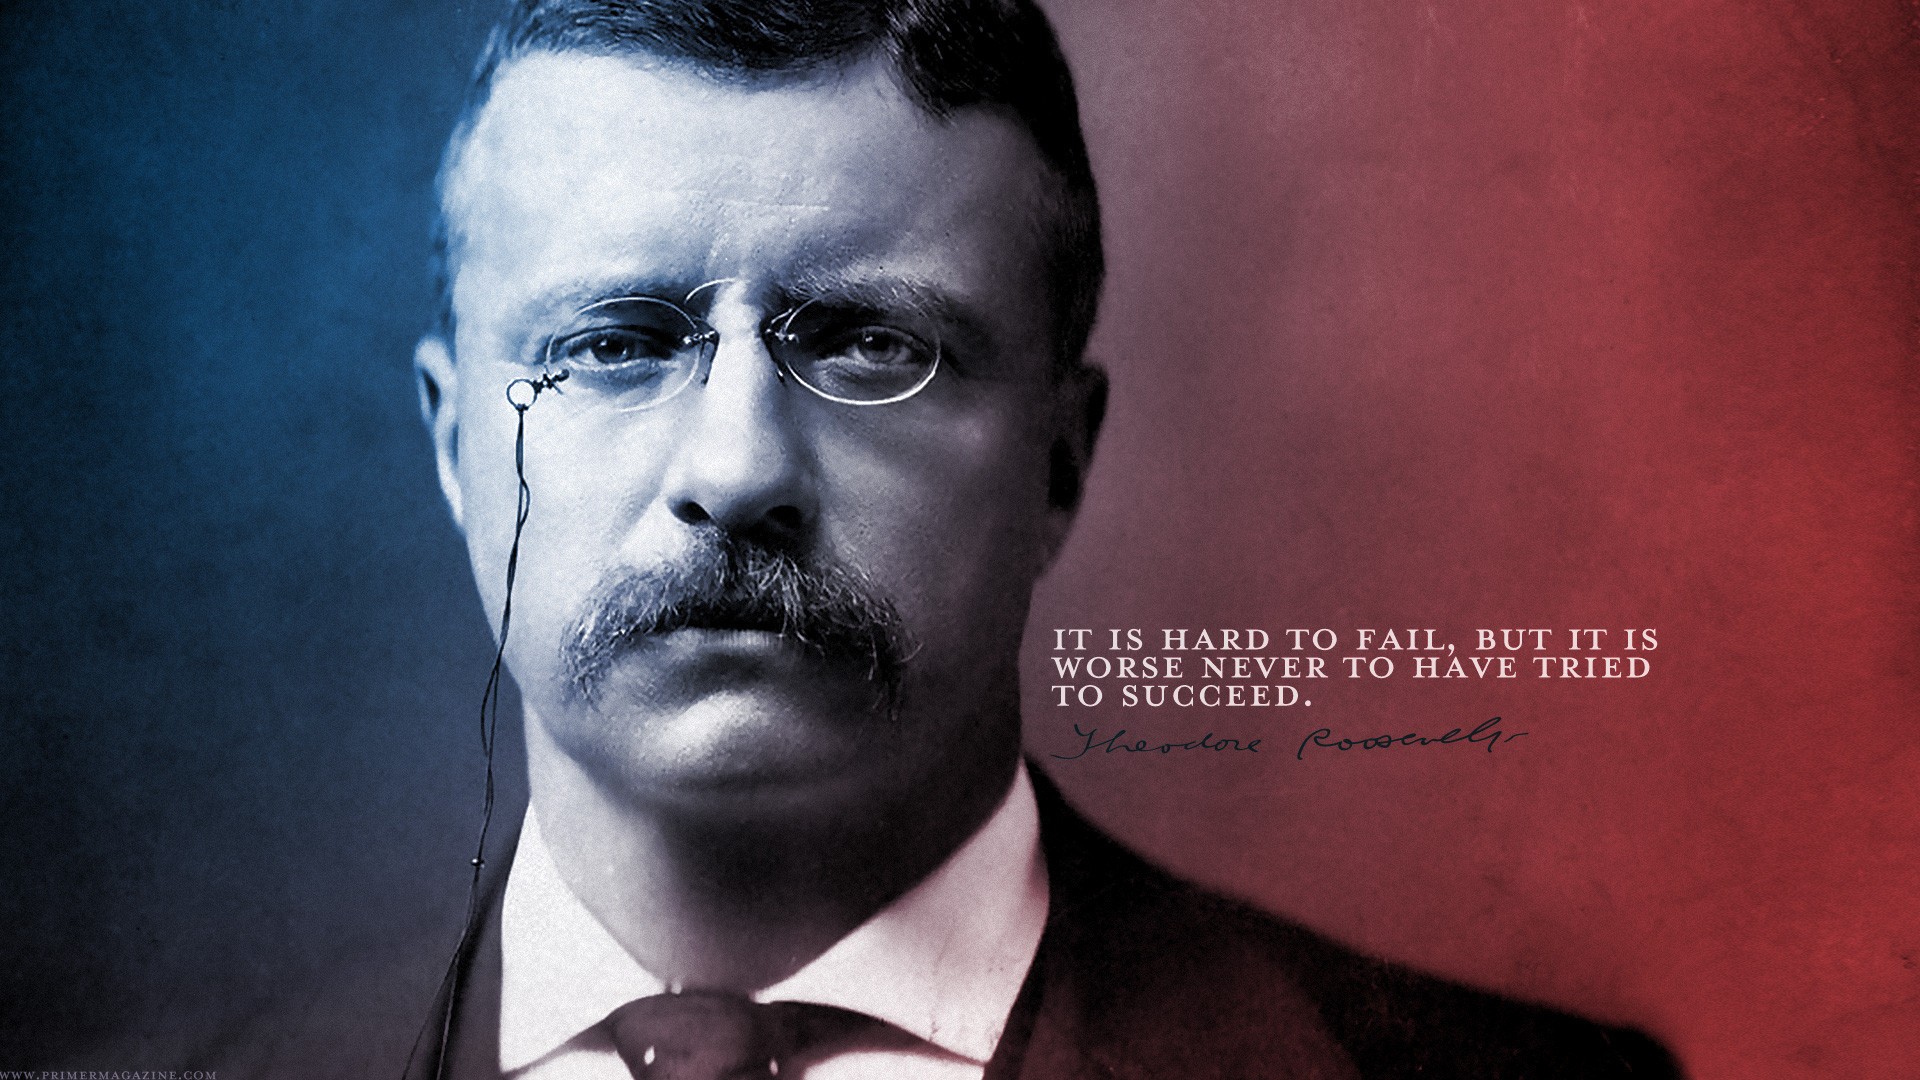 quote, Teddy Roosevelt Wallpapers HD / Desktop and Mobile Backgrounds